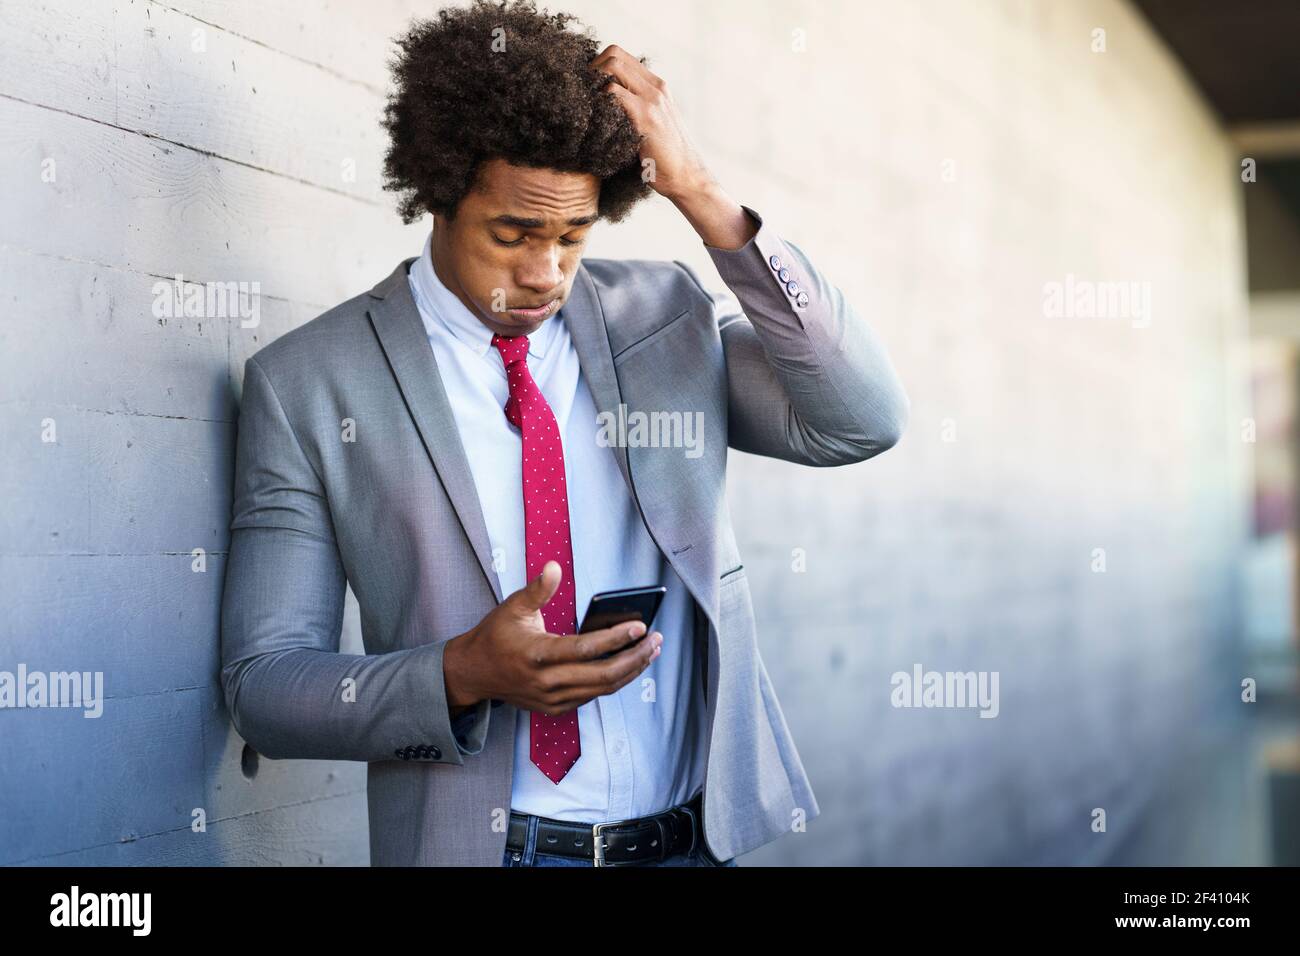 Worried Black Businessman using his smartphone near an office building. Man with afro hair.. Worried Black Businessman using his smartphone outdoors. Stock Photo